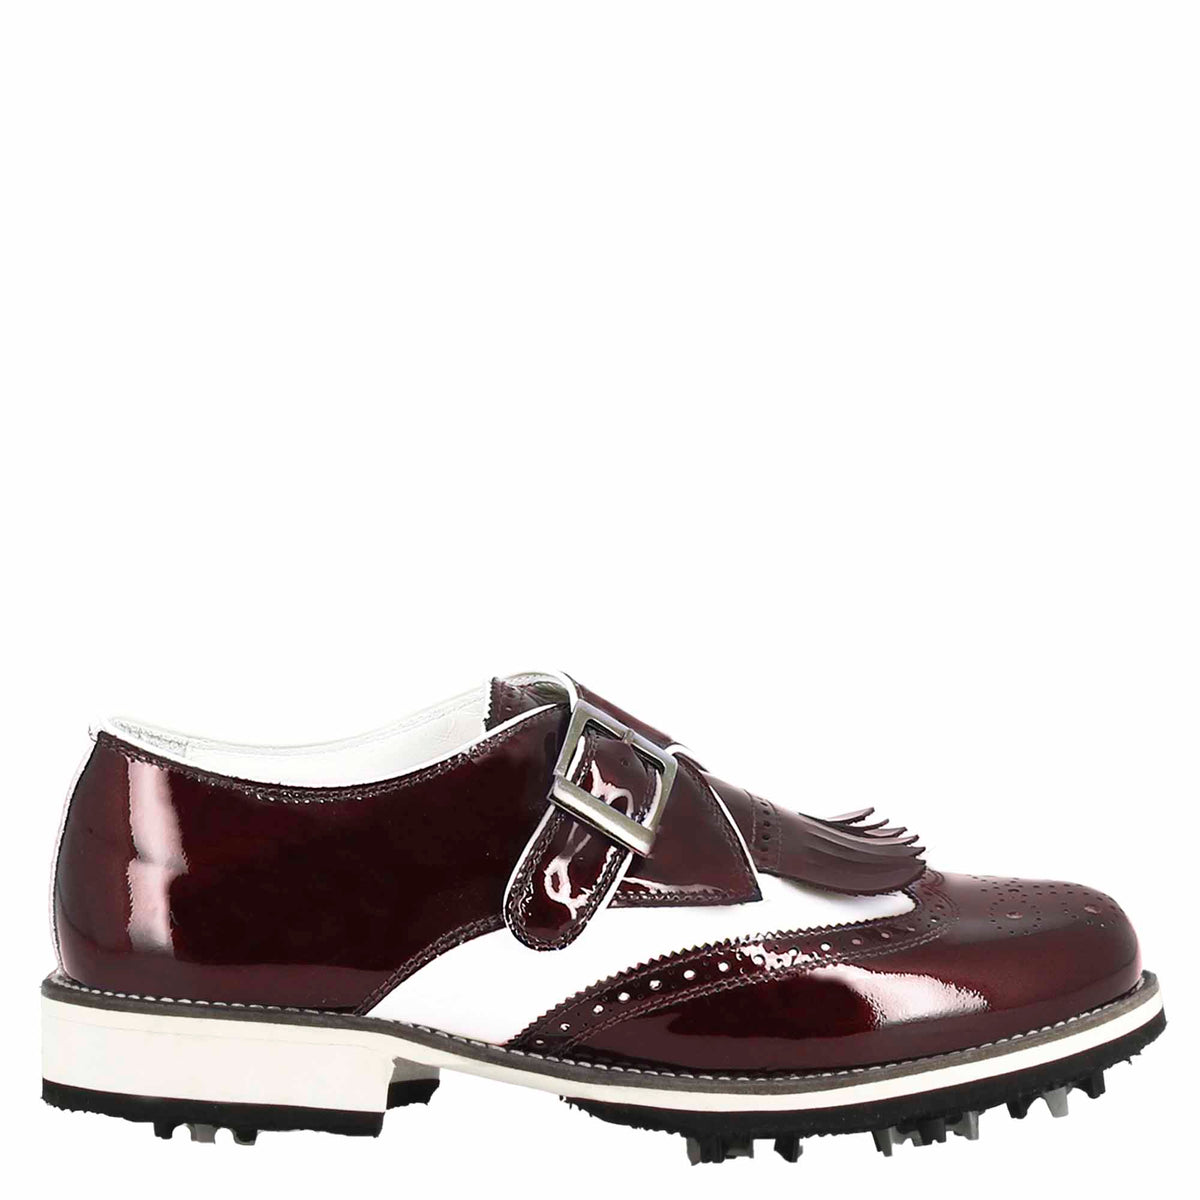 White leather and bordeaux patent leather men's golf buckle shoes